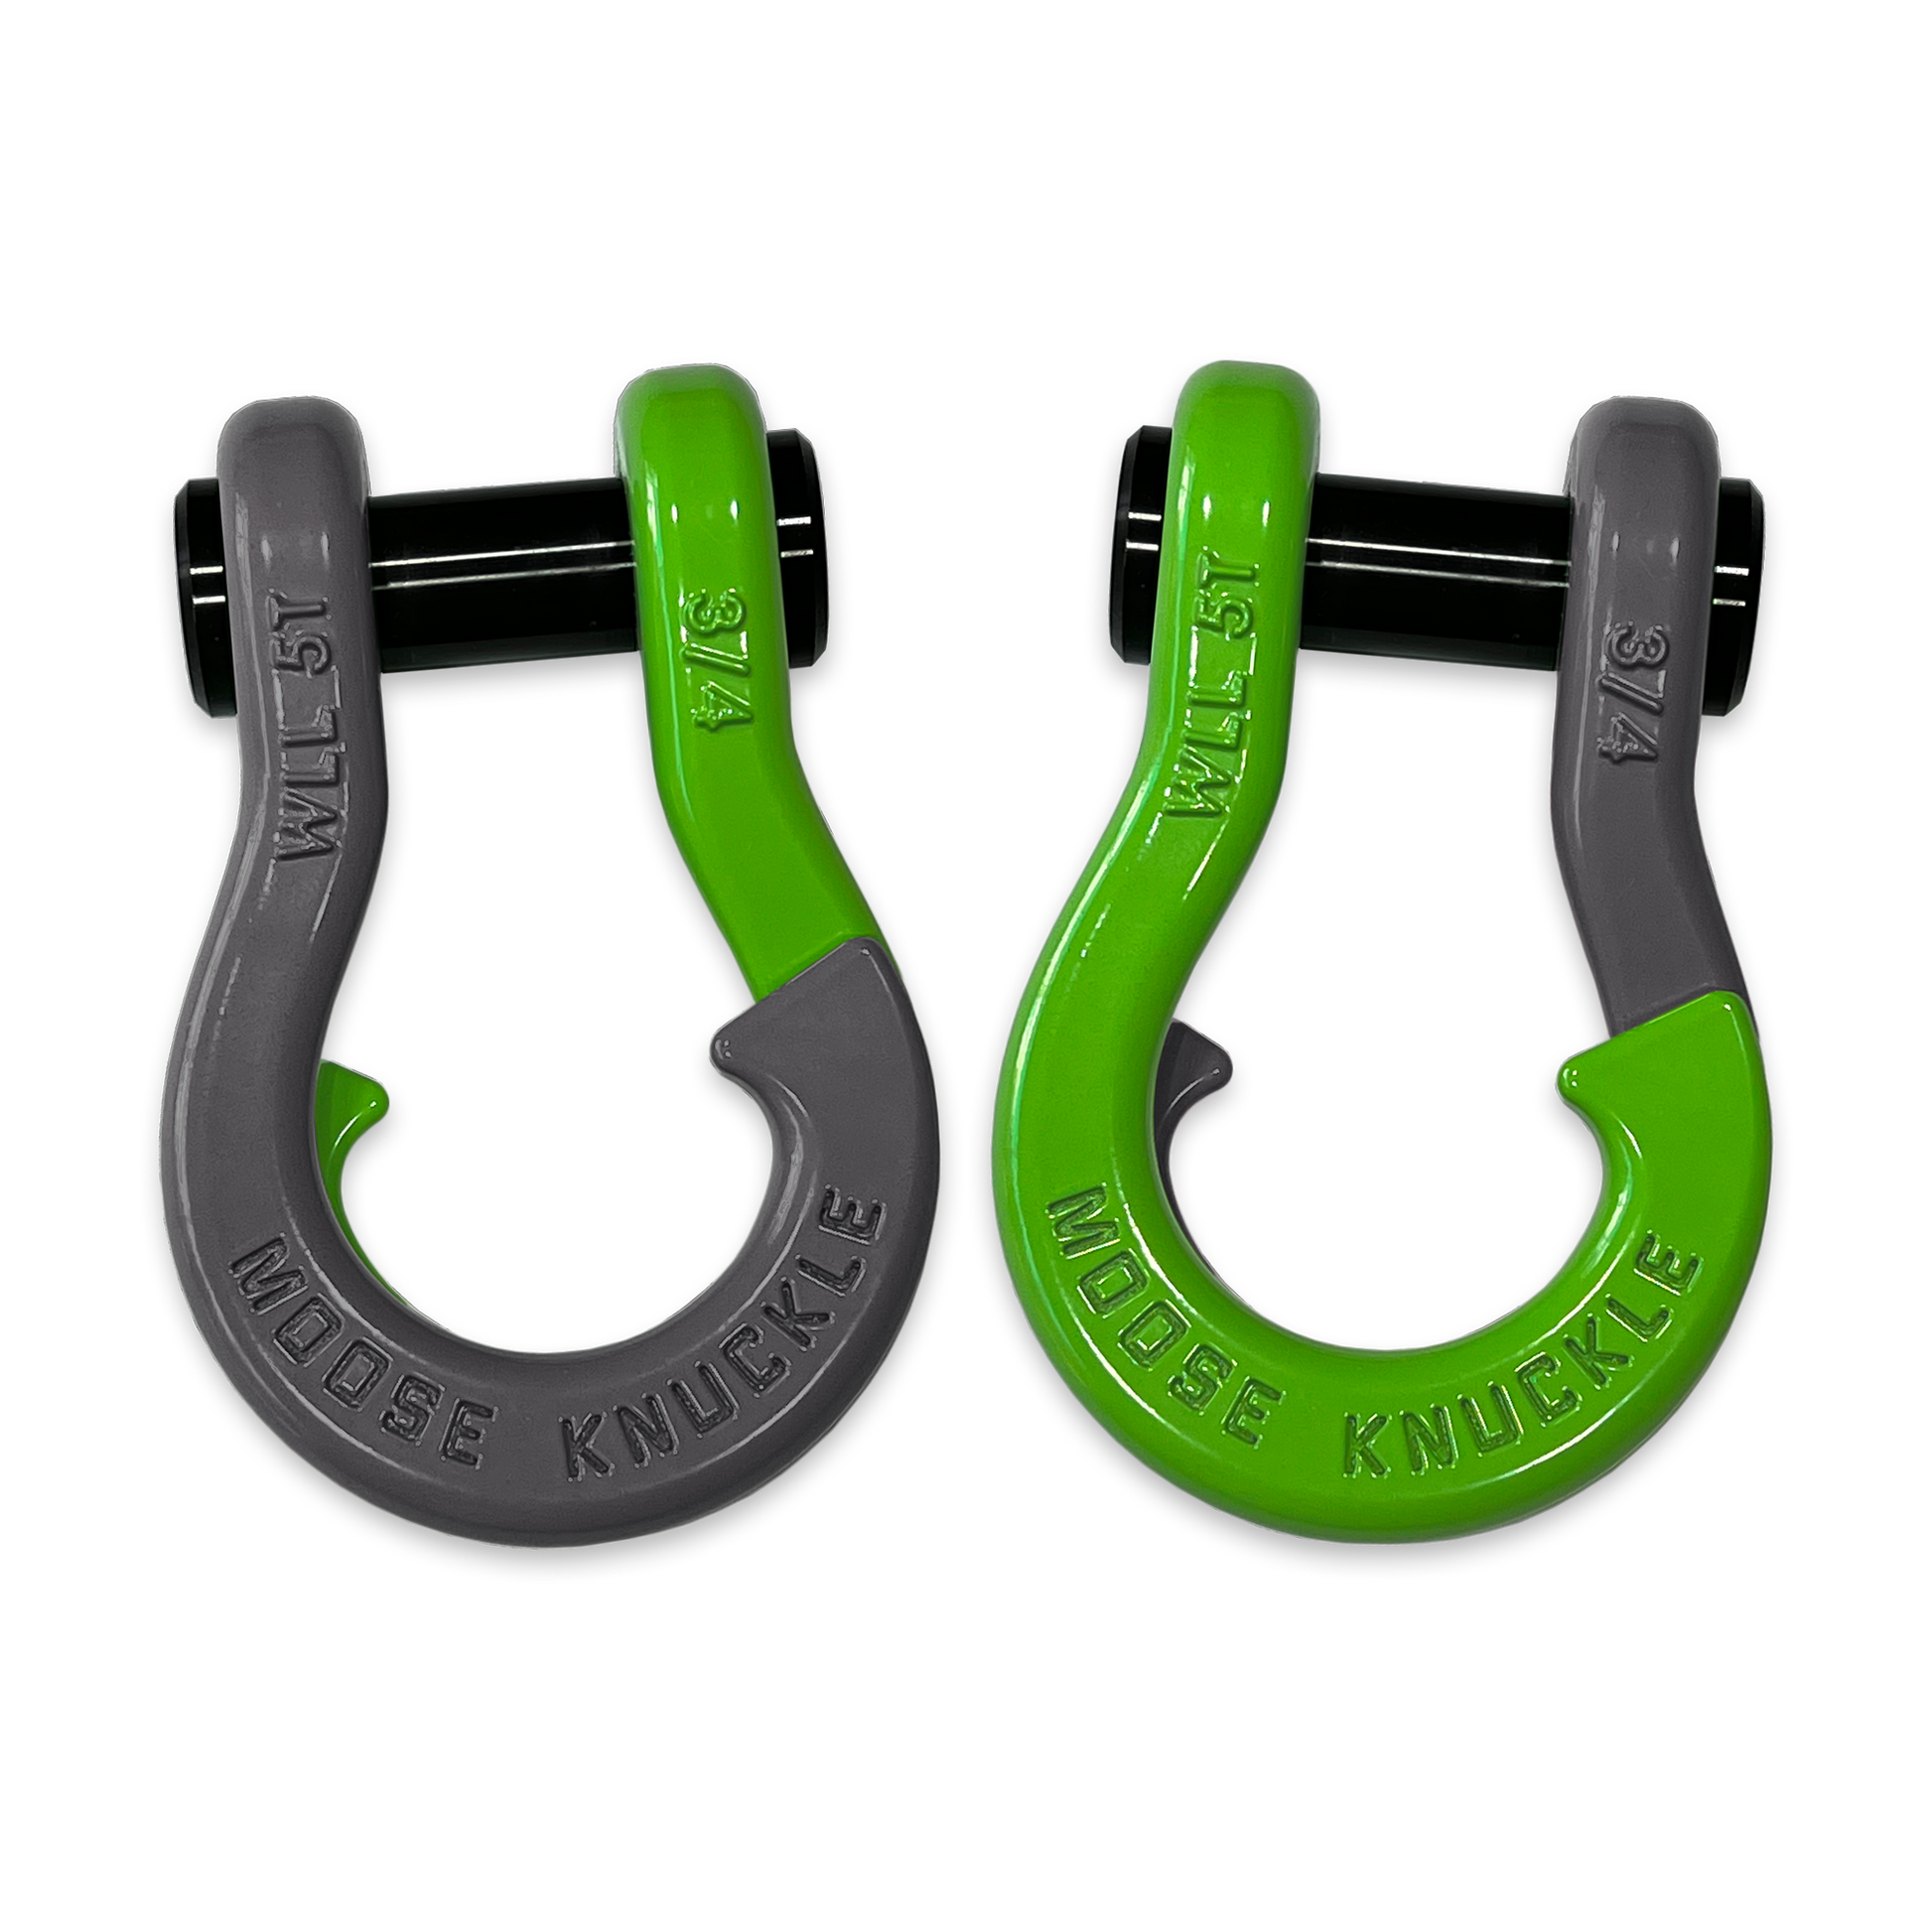 Moose Knuckle's Jowl Recovery Split Shackle 3/4 in Gun Gray and Sublime Green Combo